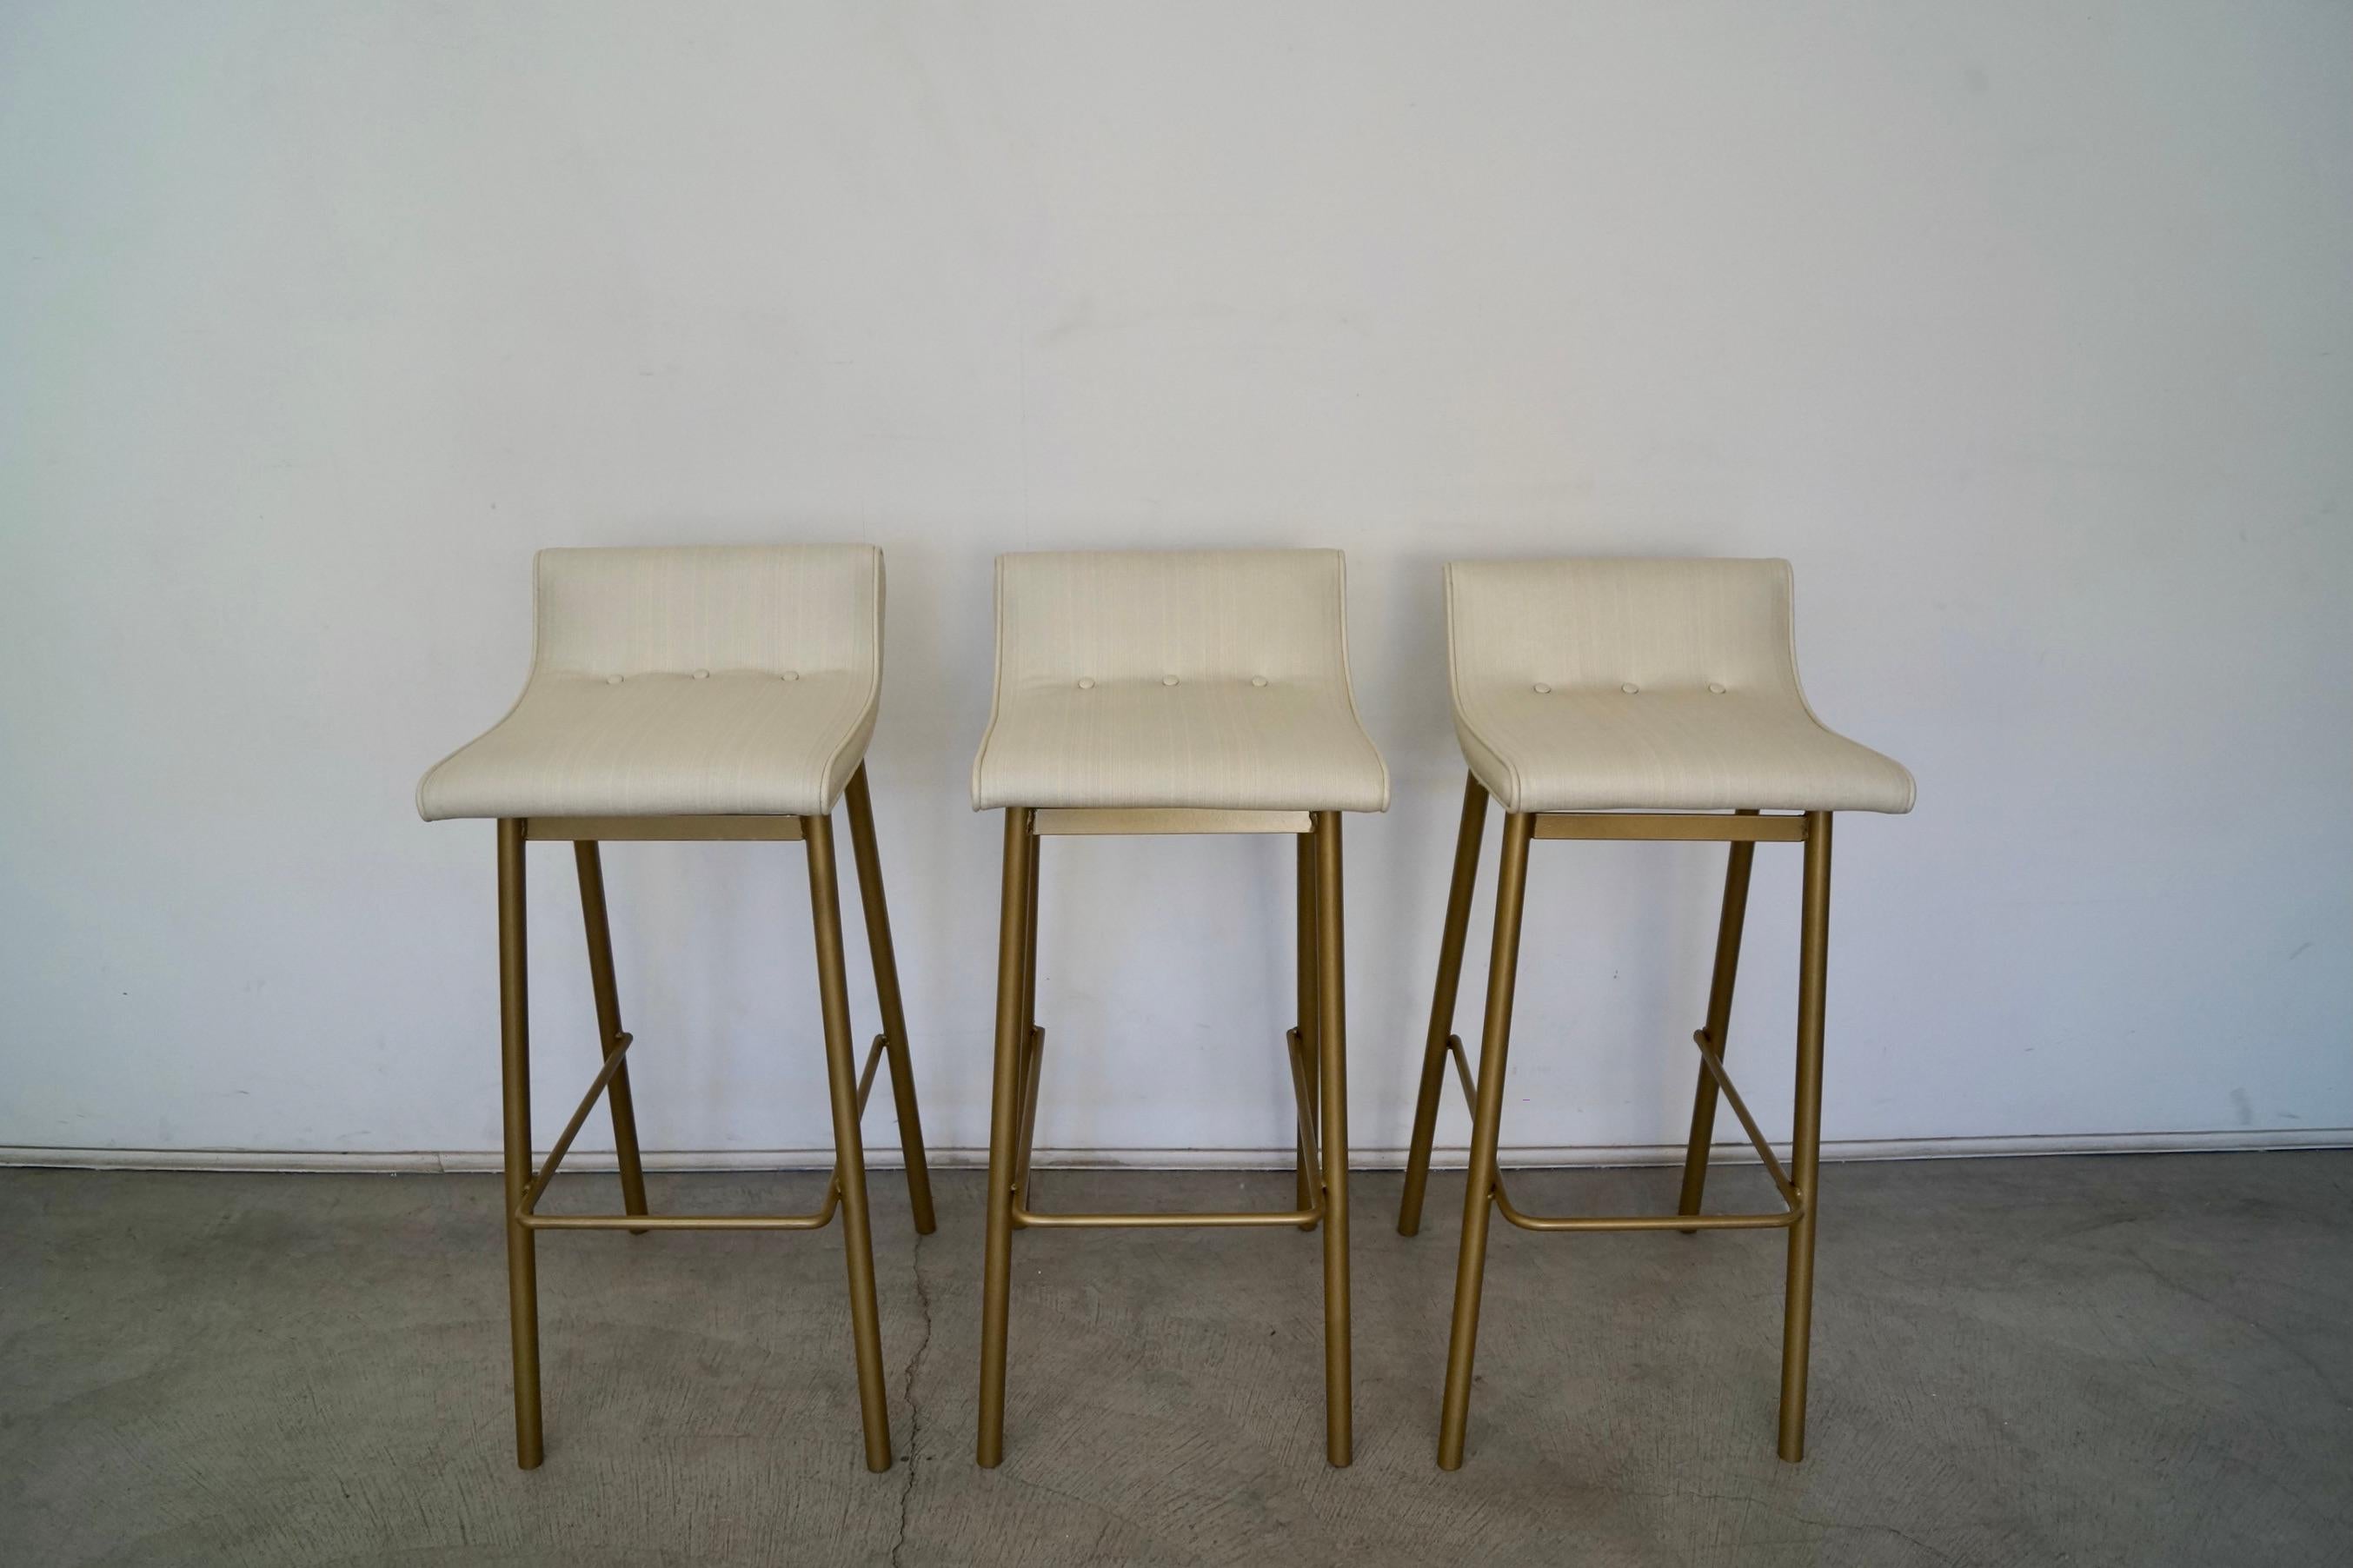 1950's Mid-Century Modern Bar Stools by Vista of California - Set of Three In Excellent Condition For Sale In Burbank, CA